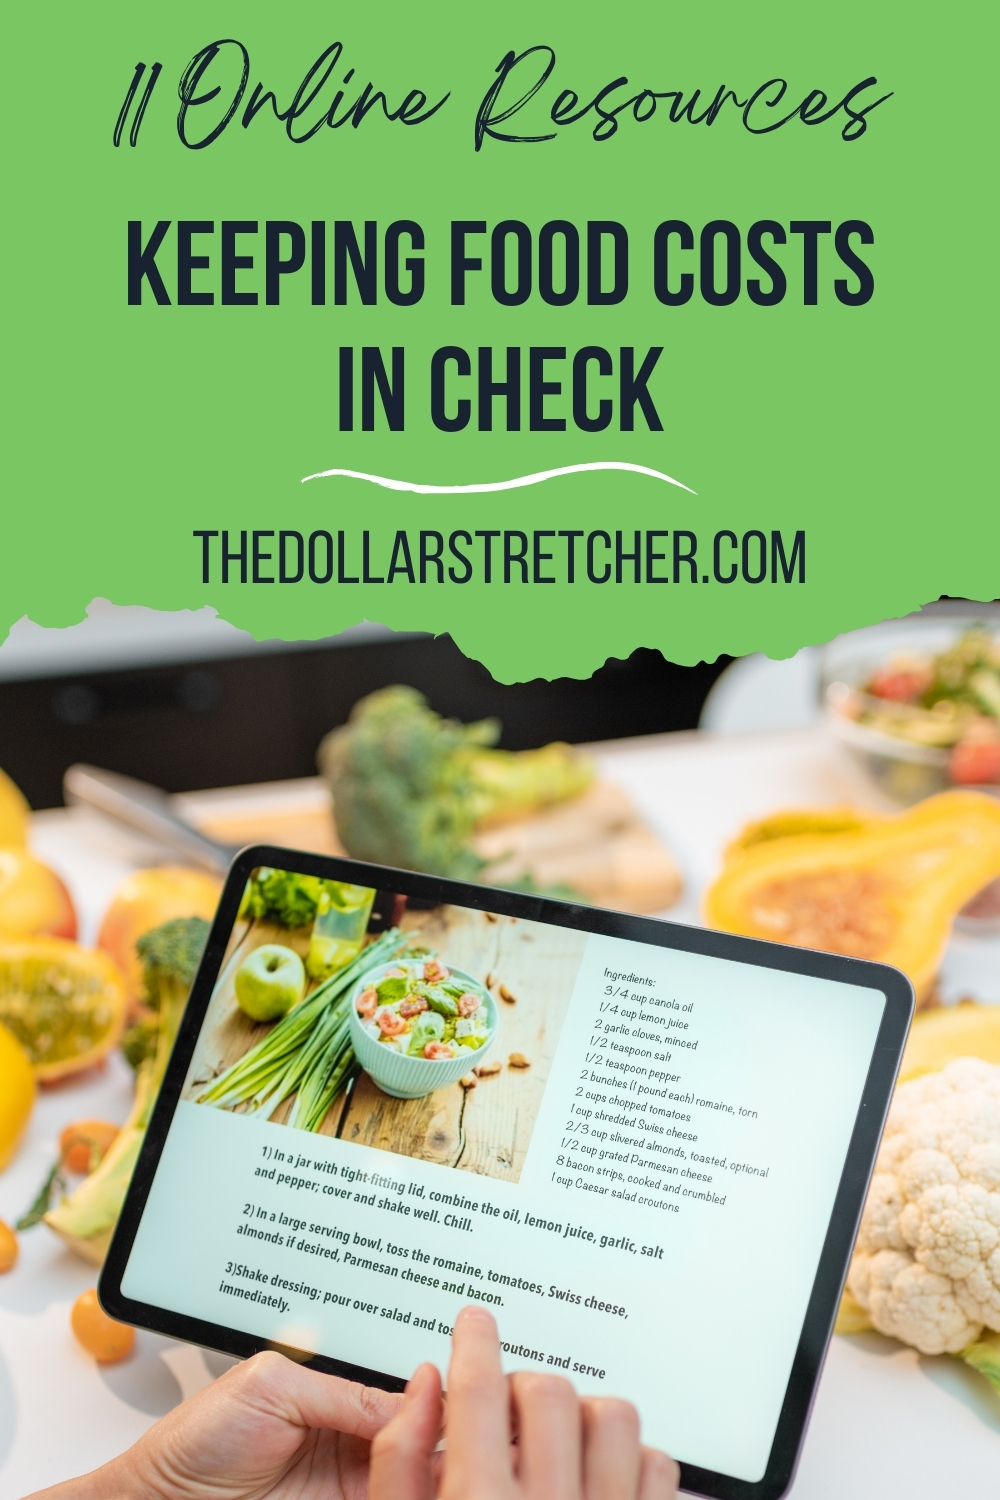 Free Online Resources for Keeping Food Costs in Check PIN